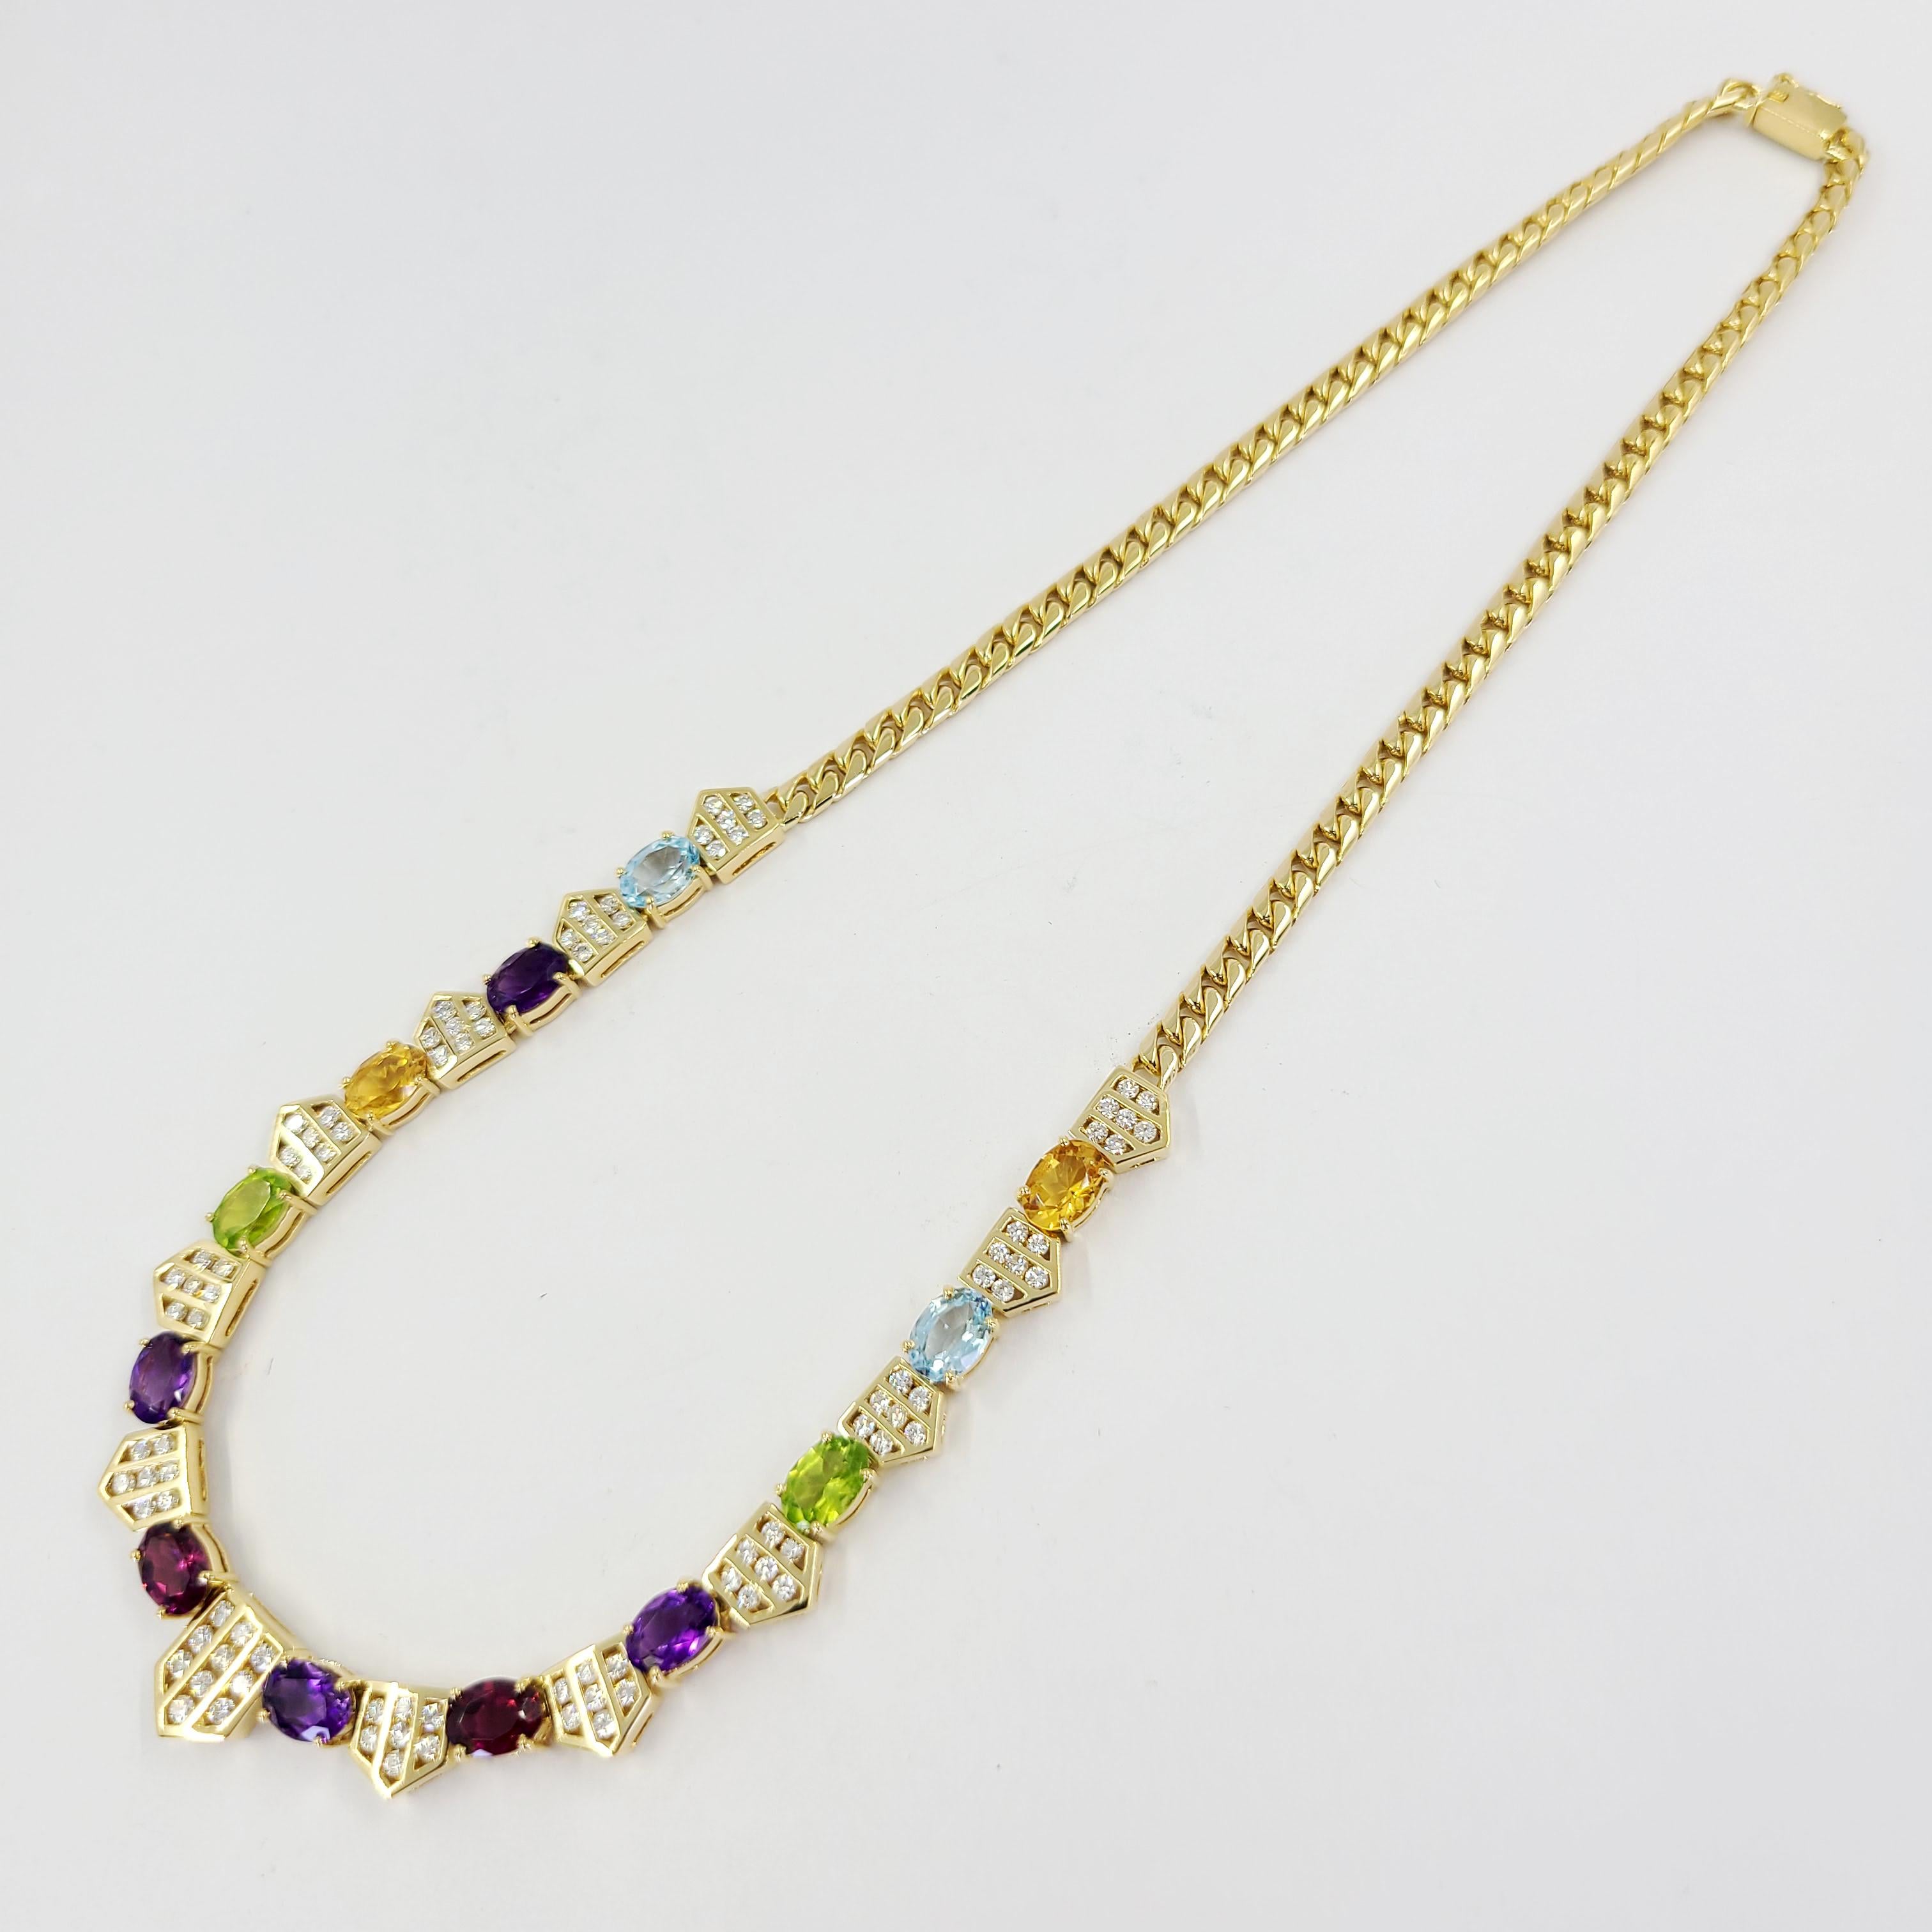 Fashion Forward 18 Karat Yellow Gold Colored Stone Necklace Featuring 94 Round Brilliant Cut Diamonds of VS Clarity and G/H Color Totaling Approximately 2.00 Carats Accented By 12 Oval Citrine, Garnet, Amethyst, Peridot, and Blue Topaz. Curb Link